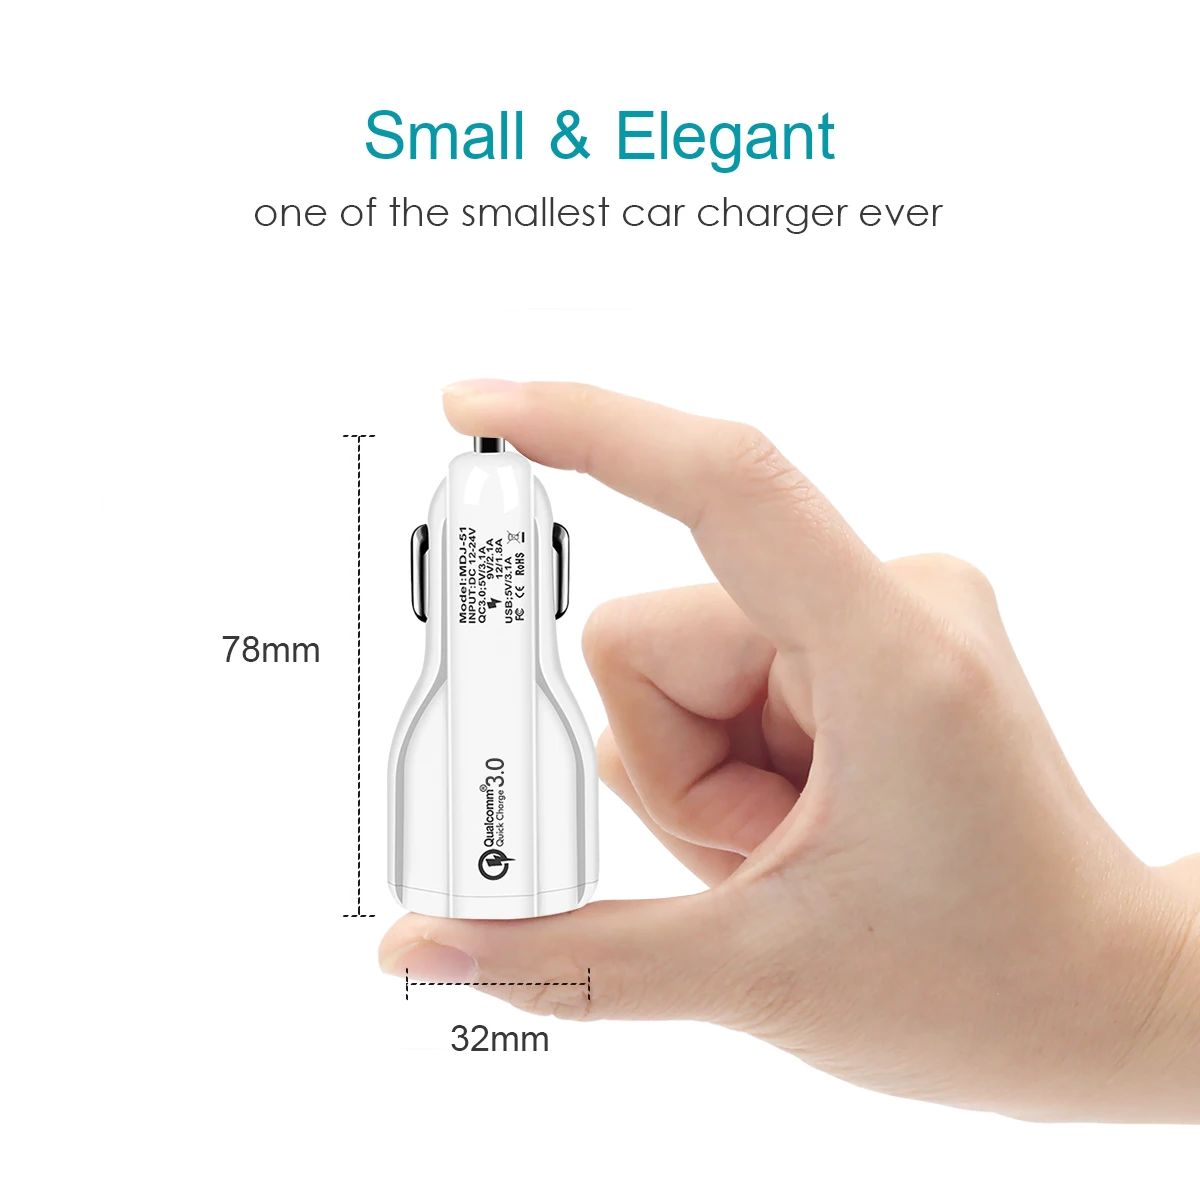 Quick Charge 3.0 Car Charger For Mobile Phone Dual Usb Car Charger Qualcomm Qc 3.0 Fast Charging Adapter Sadoun.com